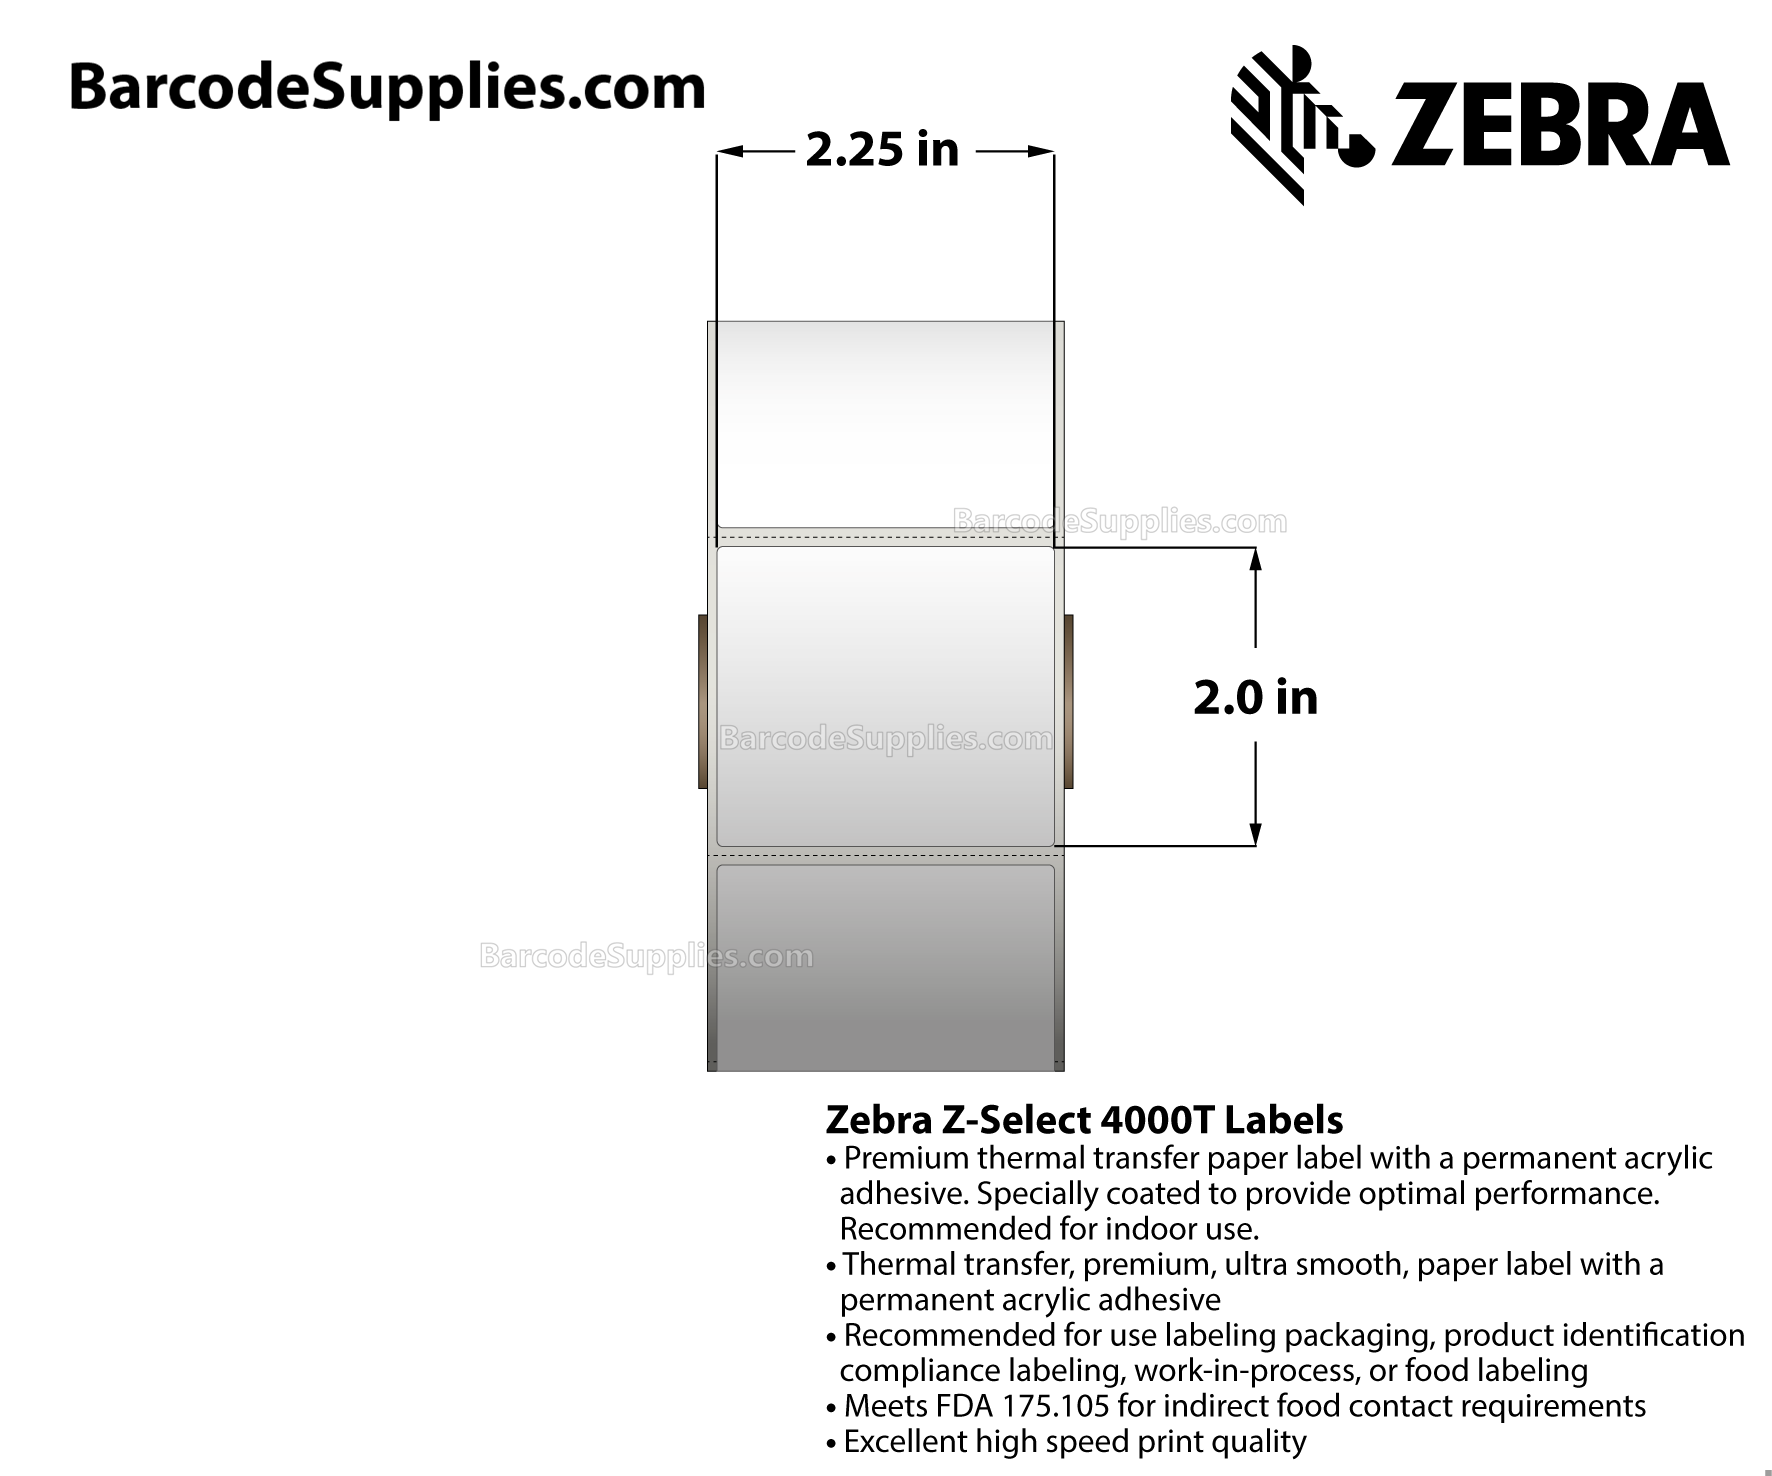 2.25 x 2 Thermal Transfer White Z-Select 4000T Labels With Permanent Adhesive - Perforated - 1370 Labels Per Roll - Carton Of 6 Rolls - 8220 Labels Total - MPN: 10009525